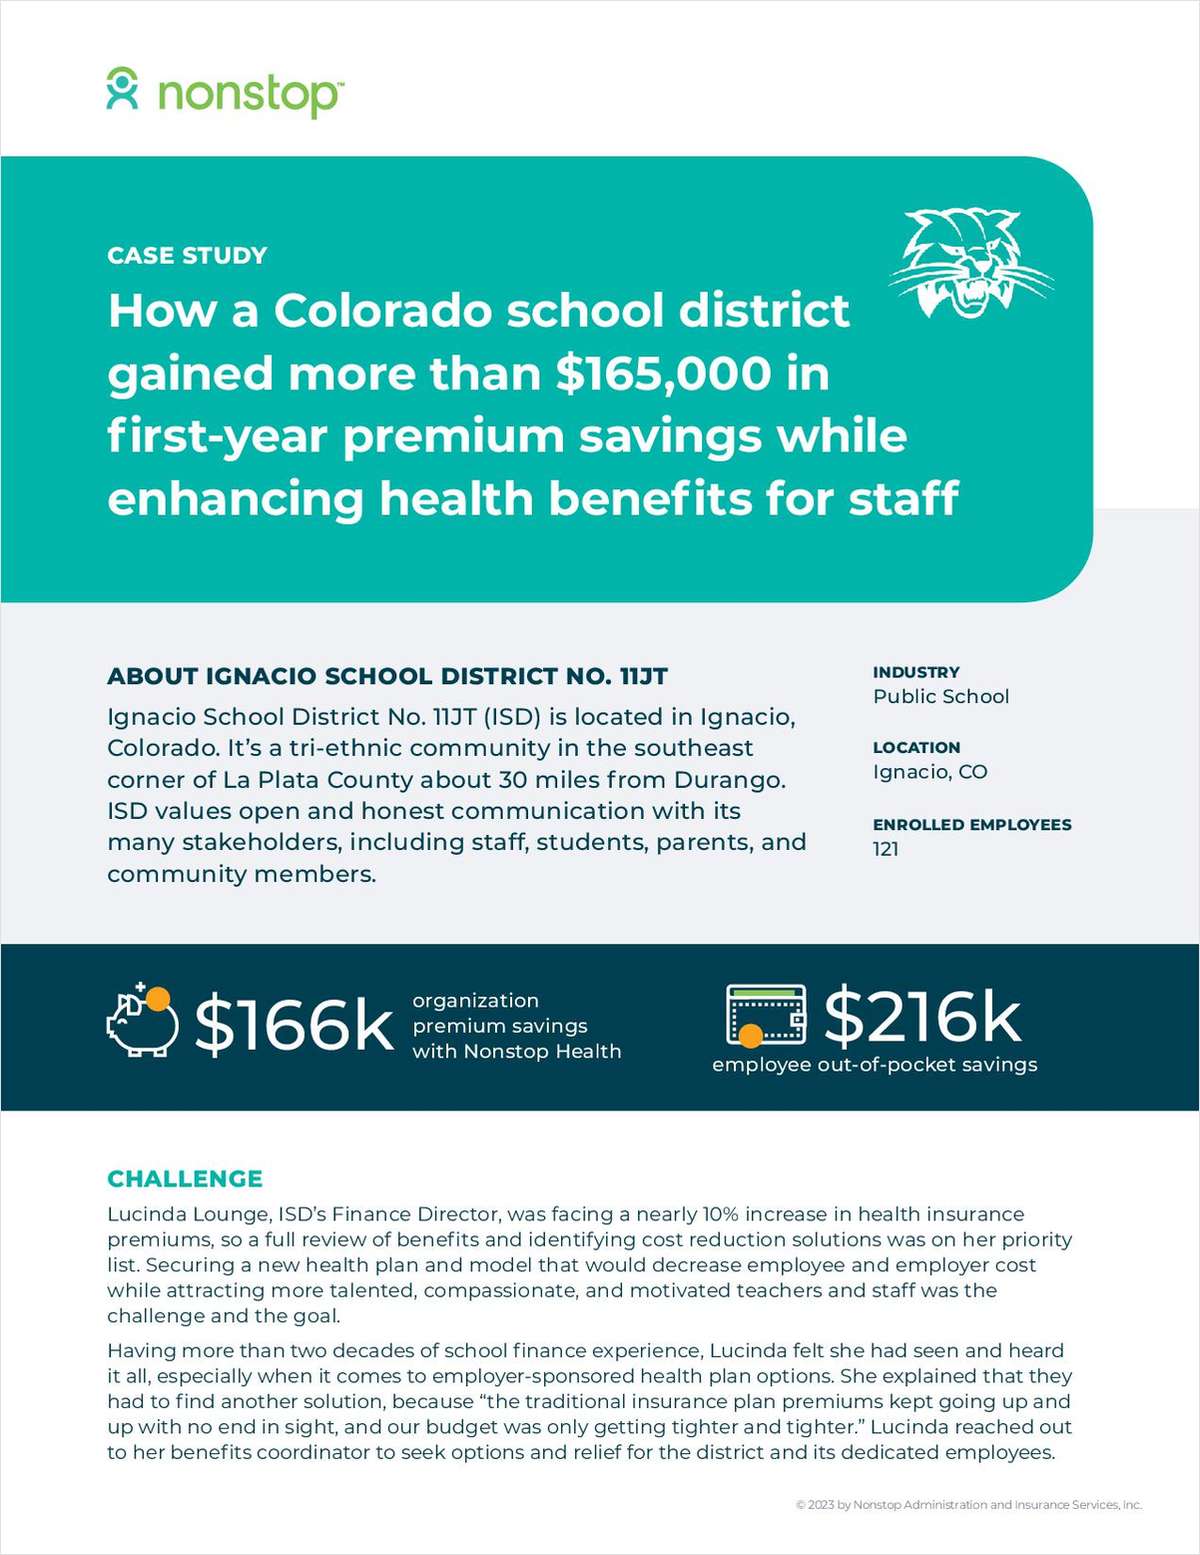 Case Study: How a Colorado School District Gained More Than $165,000 in First-Year Premium Savings While Enhancing Health Benefits for Staff link